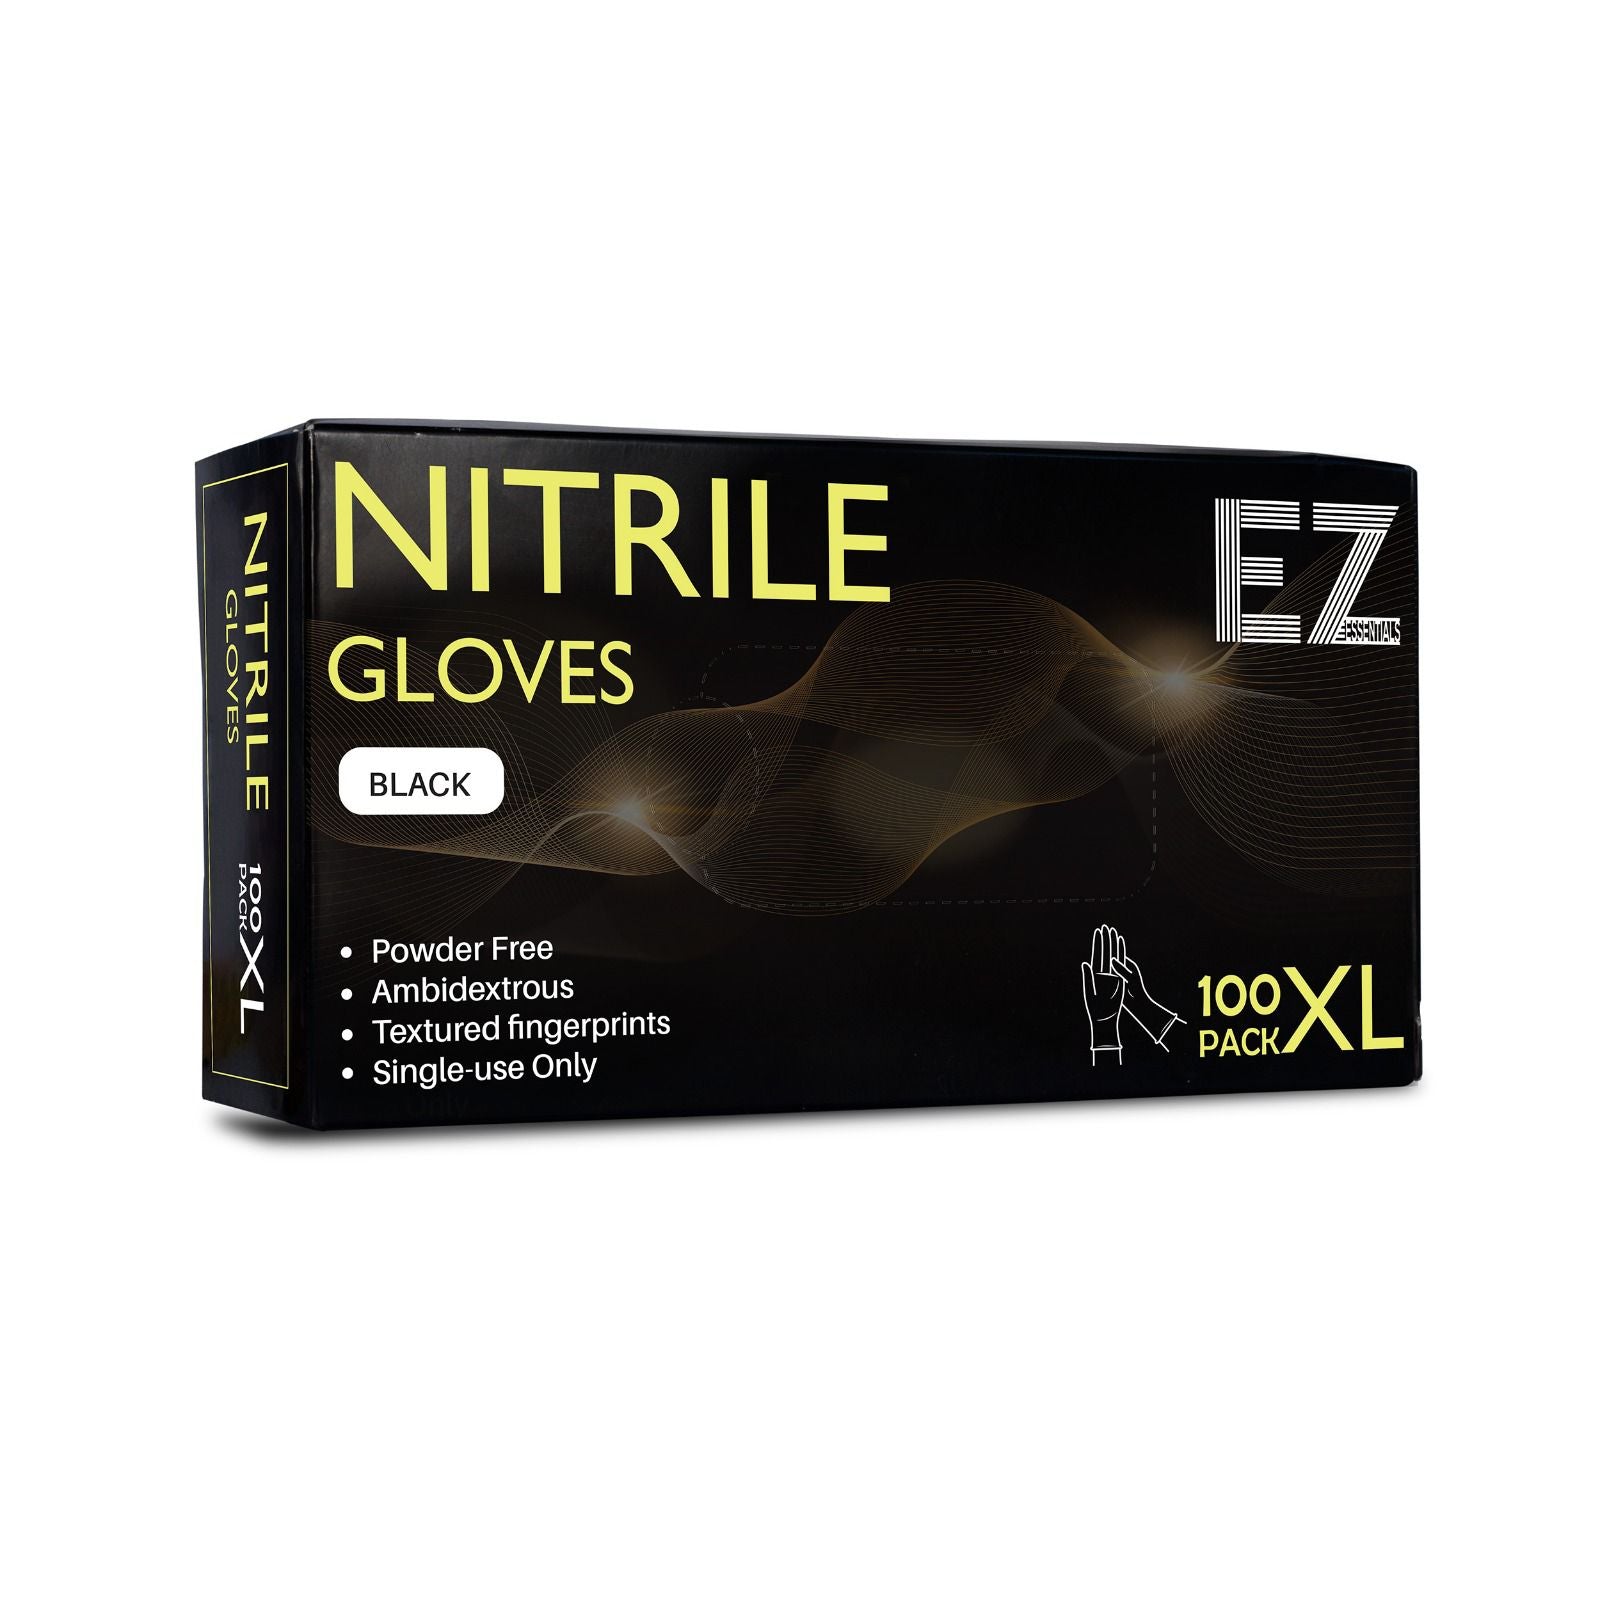 EZFOIL NITRILE GLOVES BLACK 100 PACK - EXTRA LARGE - HairBeautyInk